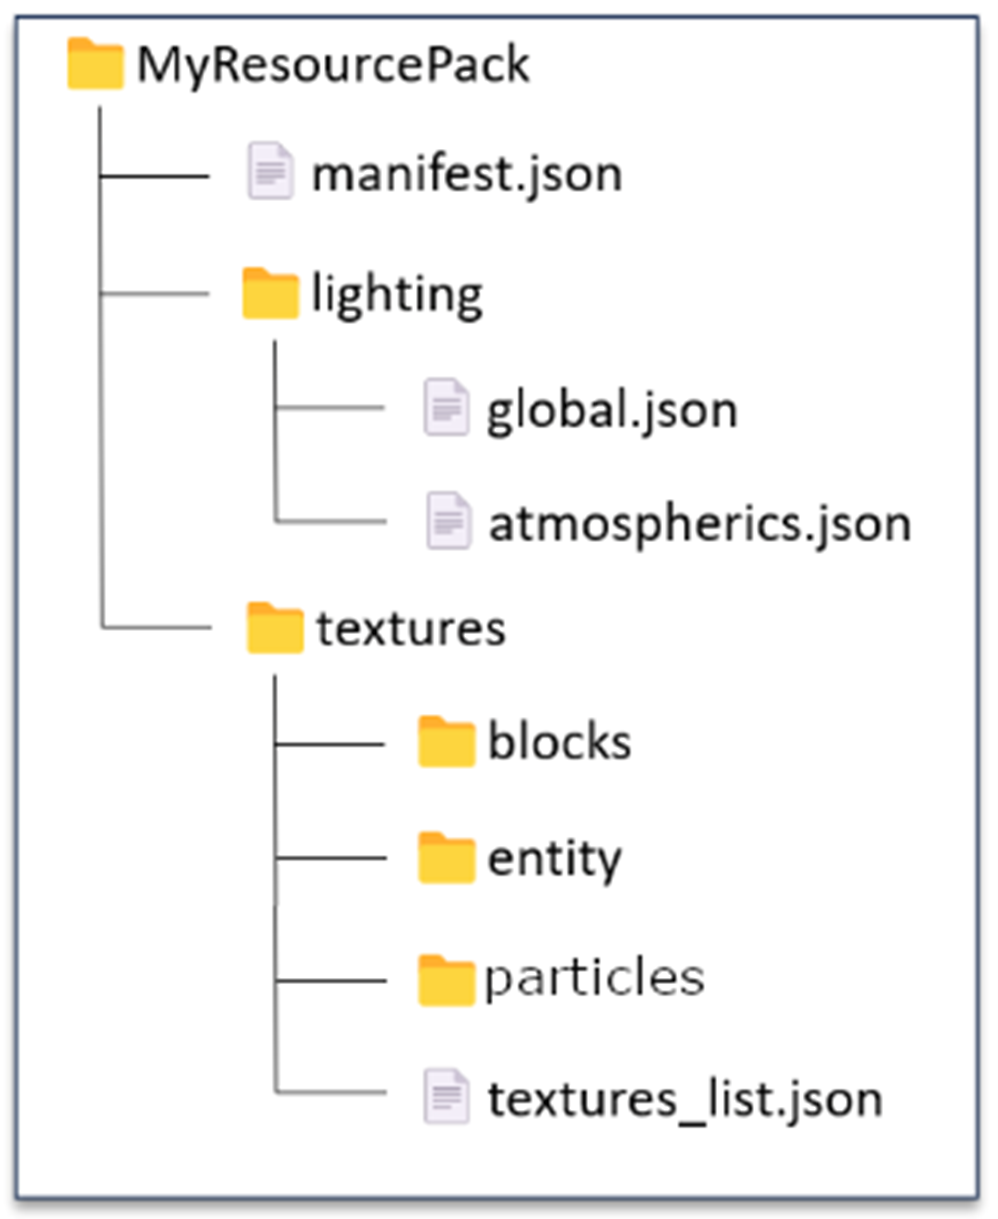 Image of the file structure for a resource pack with a manifest file, a lighting folder containing global.json and atmospherics.json files, and a textures file containing a "blocks" folder, an "entities" folder, and a textures_list.json file.